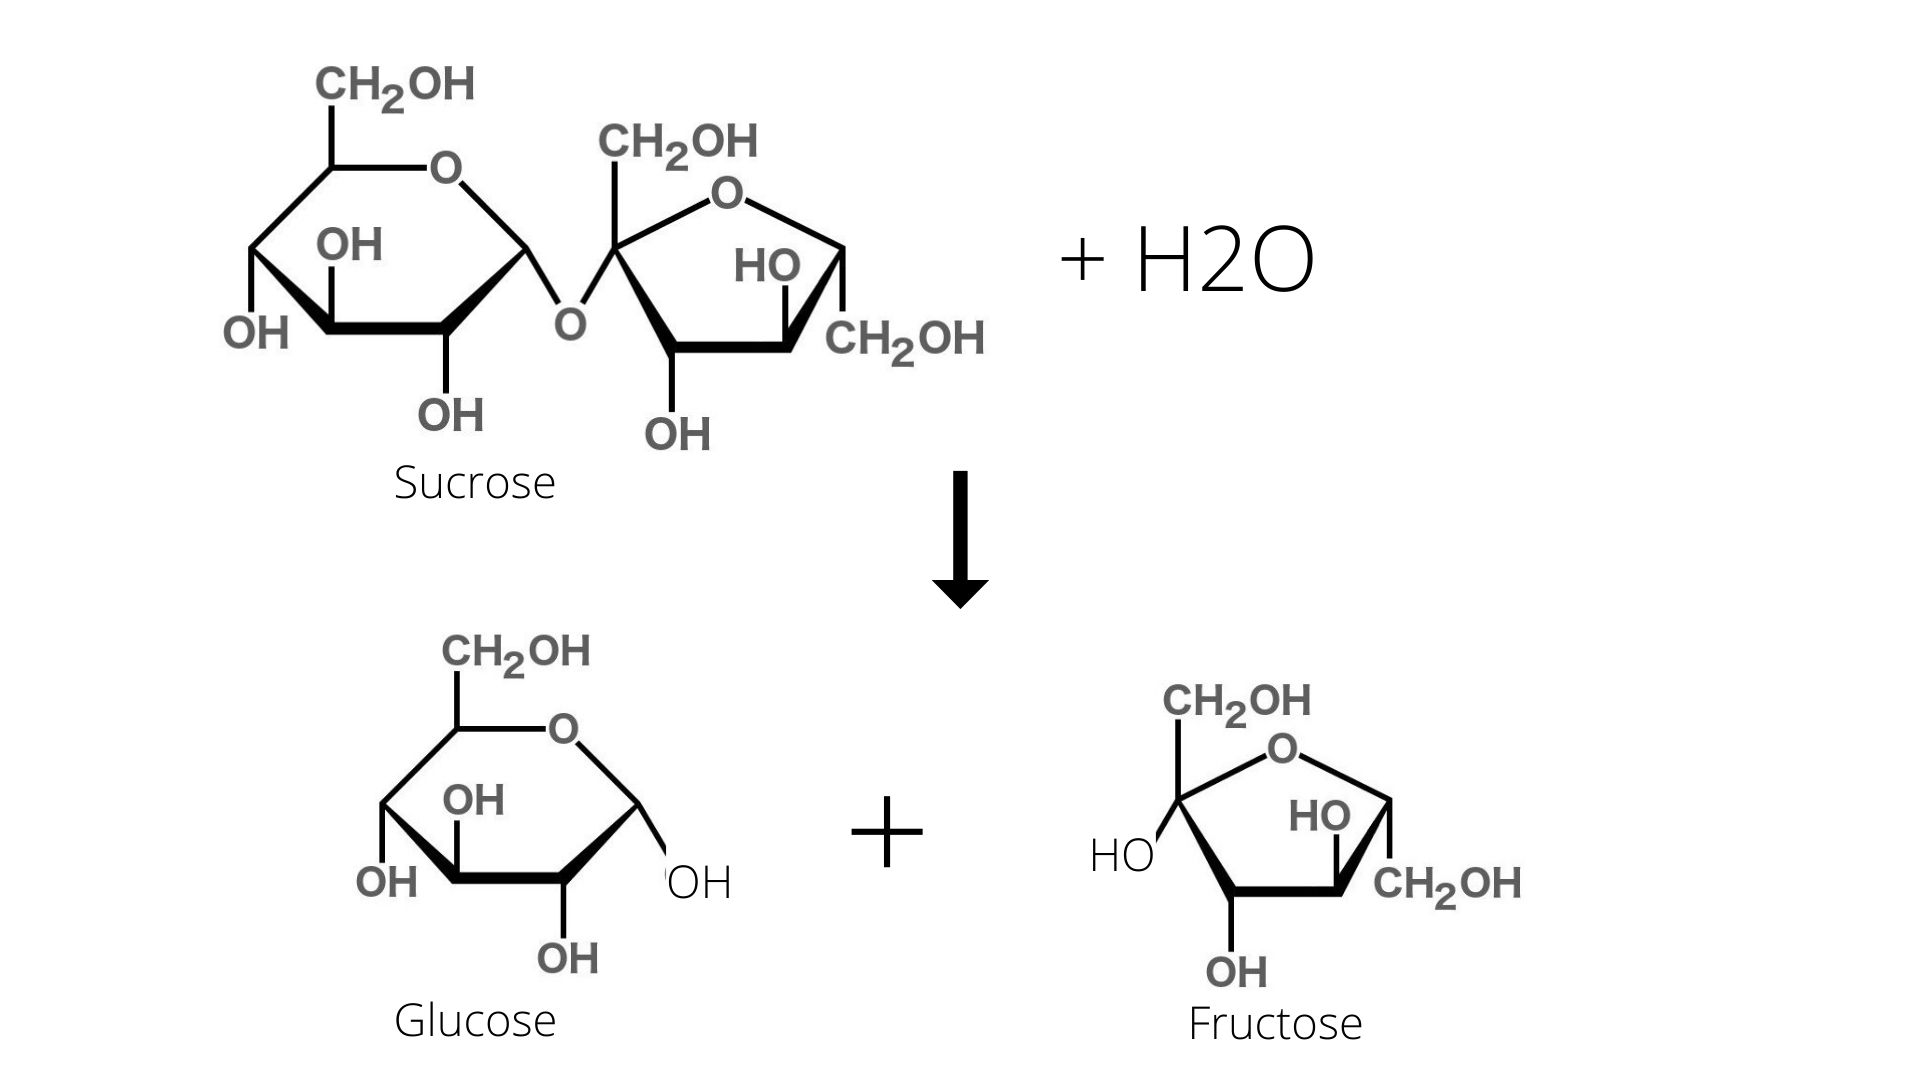 structure of glucose fructose and sucrose